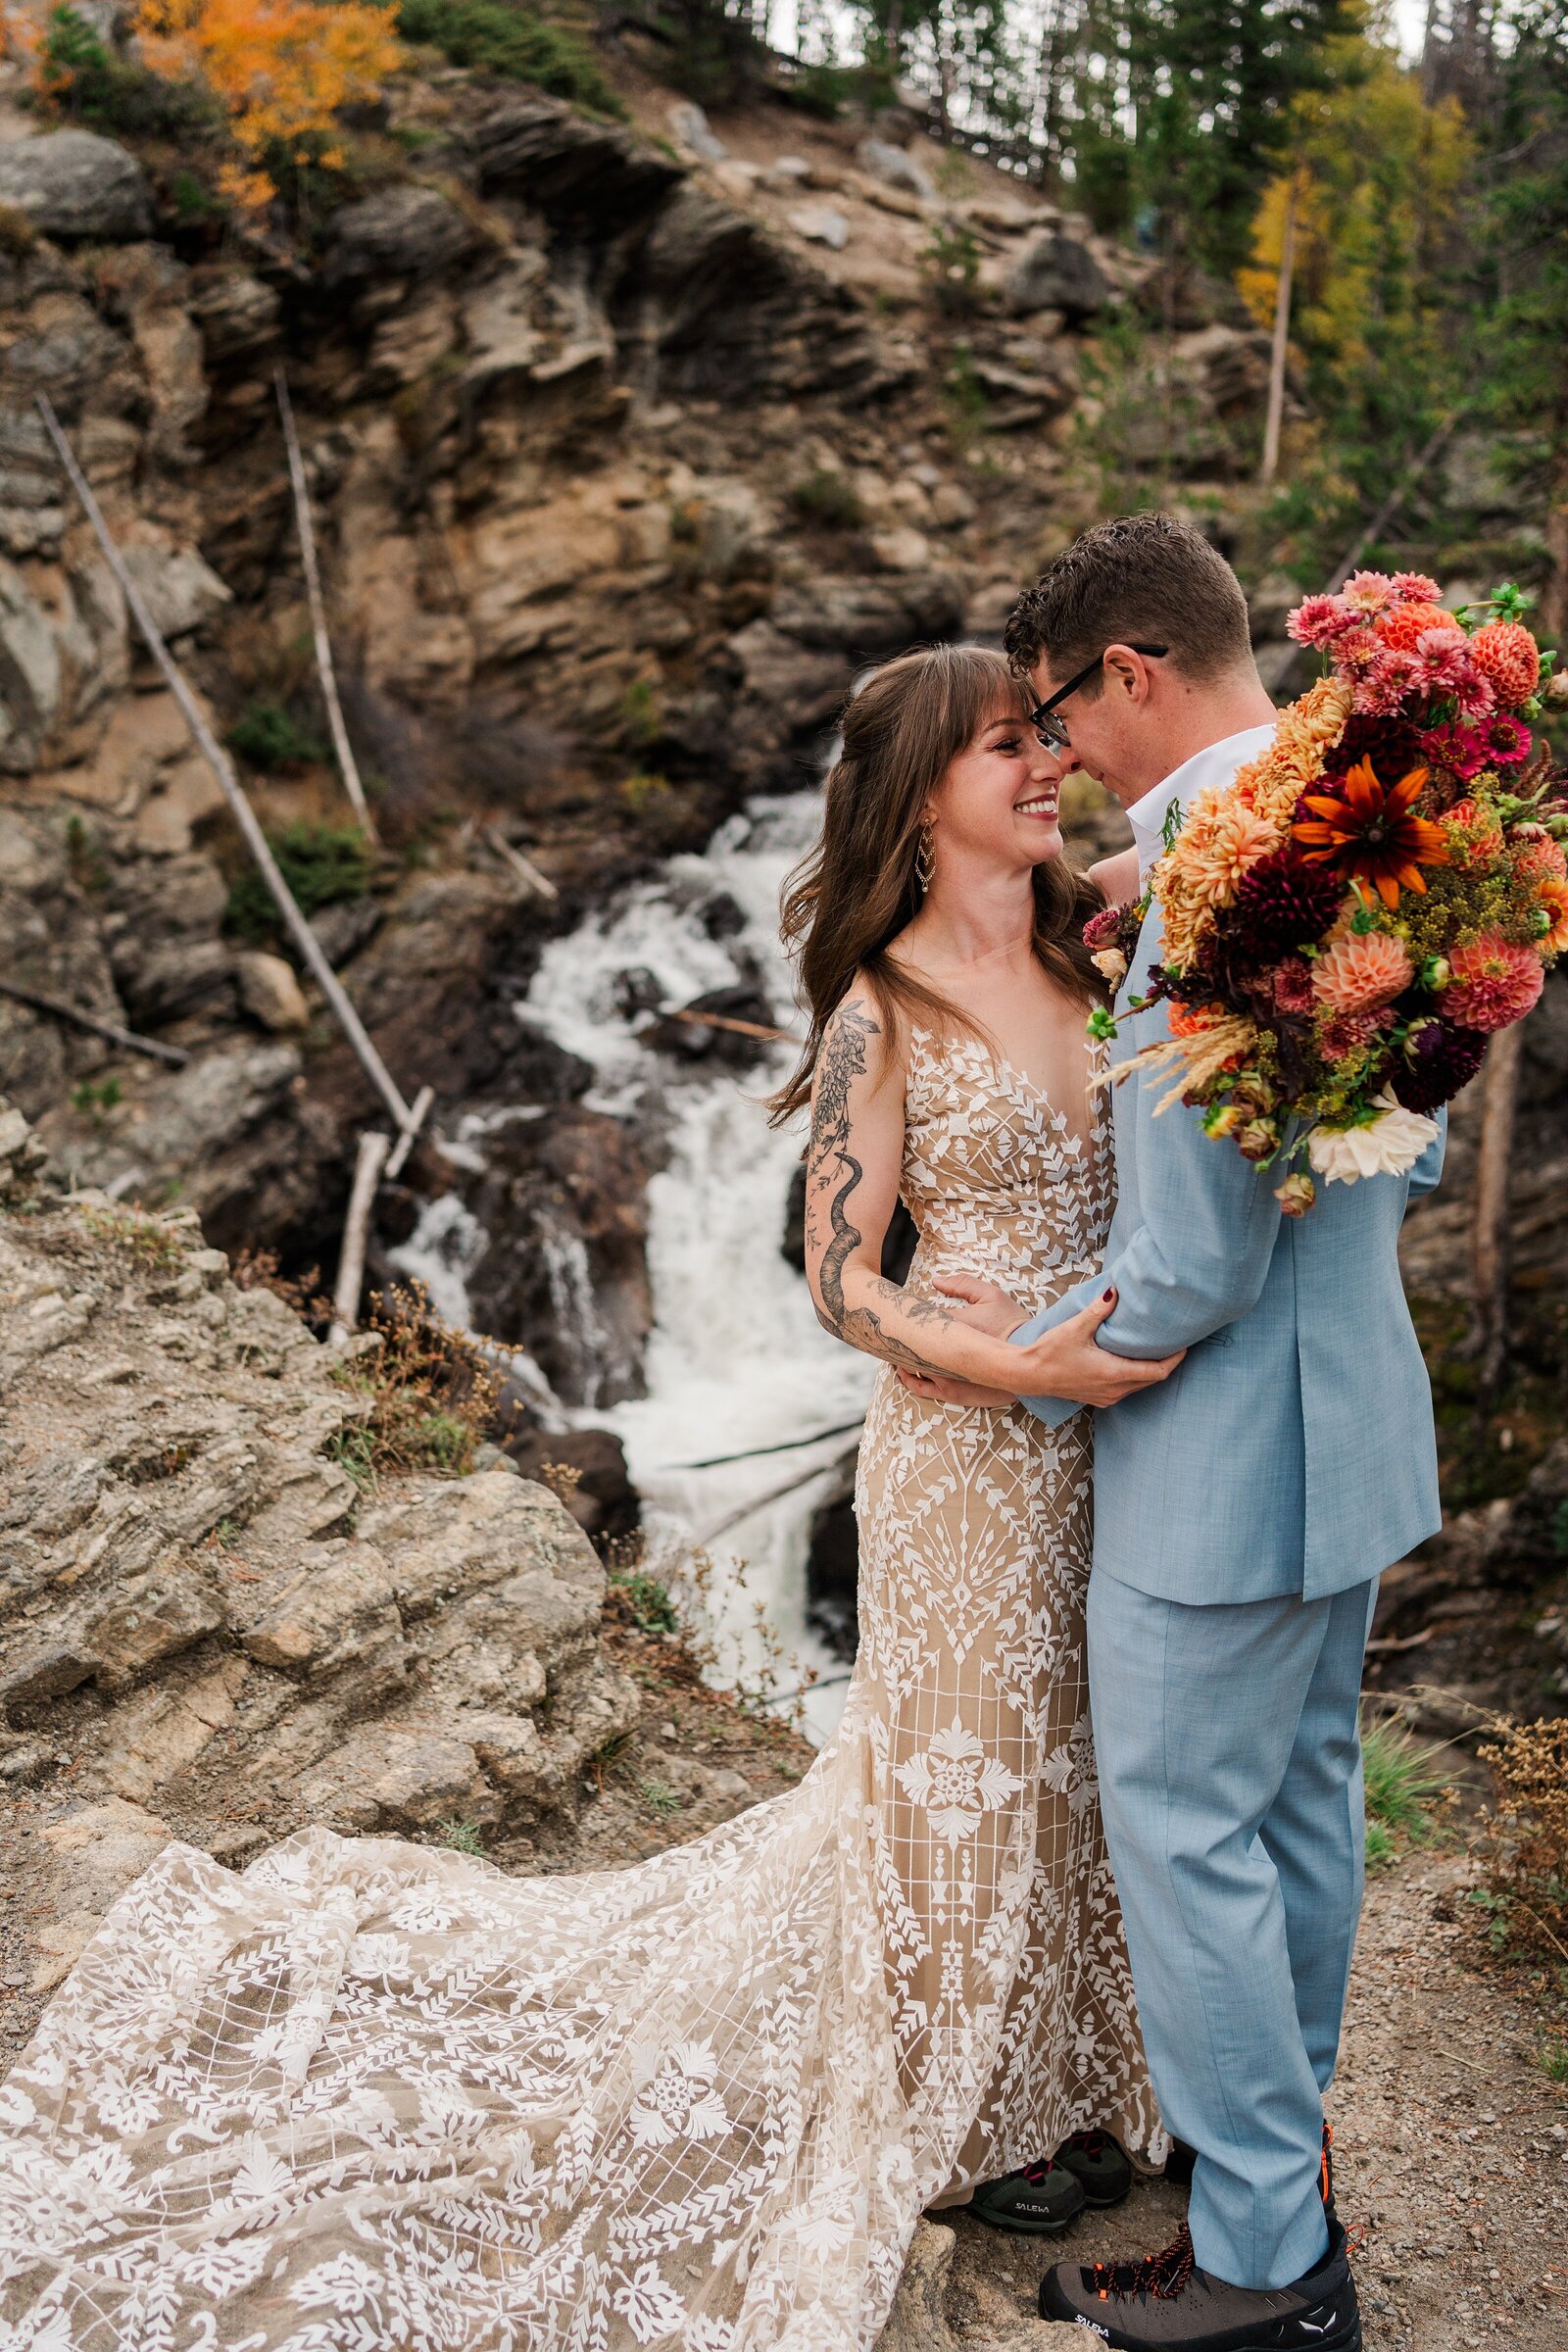 Celebrate your love in the great outdoors with Samantha Immer Photography's outdoor wedding photography in Colorado. We provide candid and natural photos that capture the beauty of your intimate ceremony.